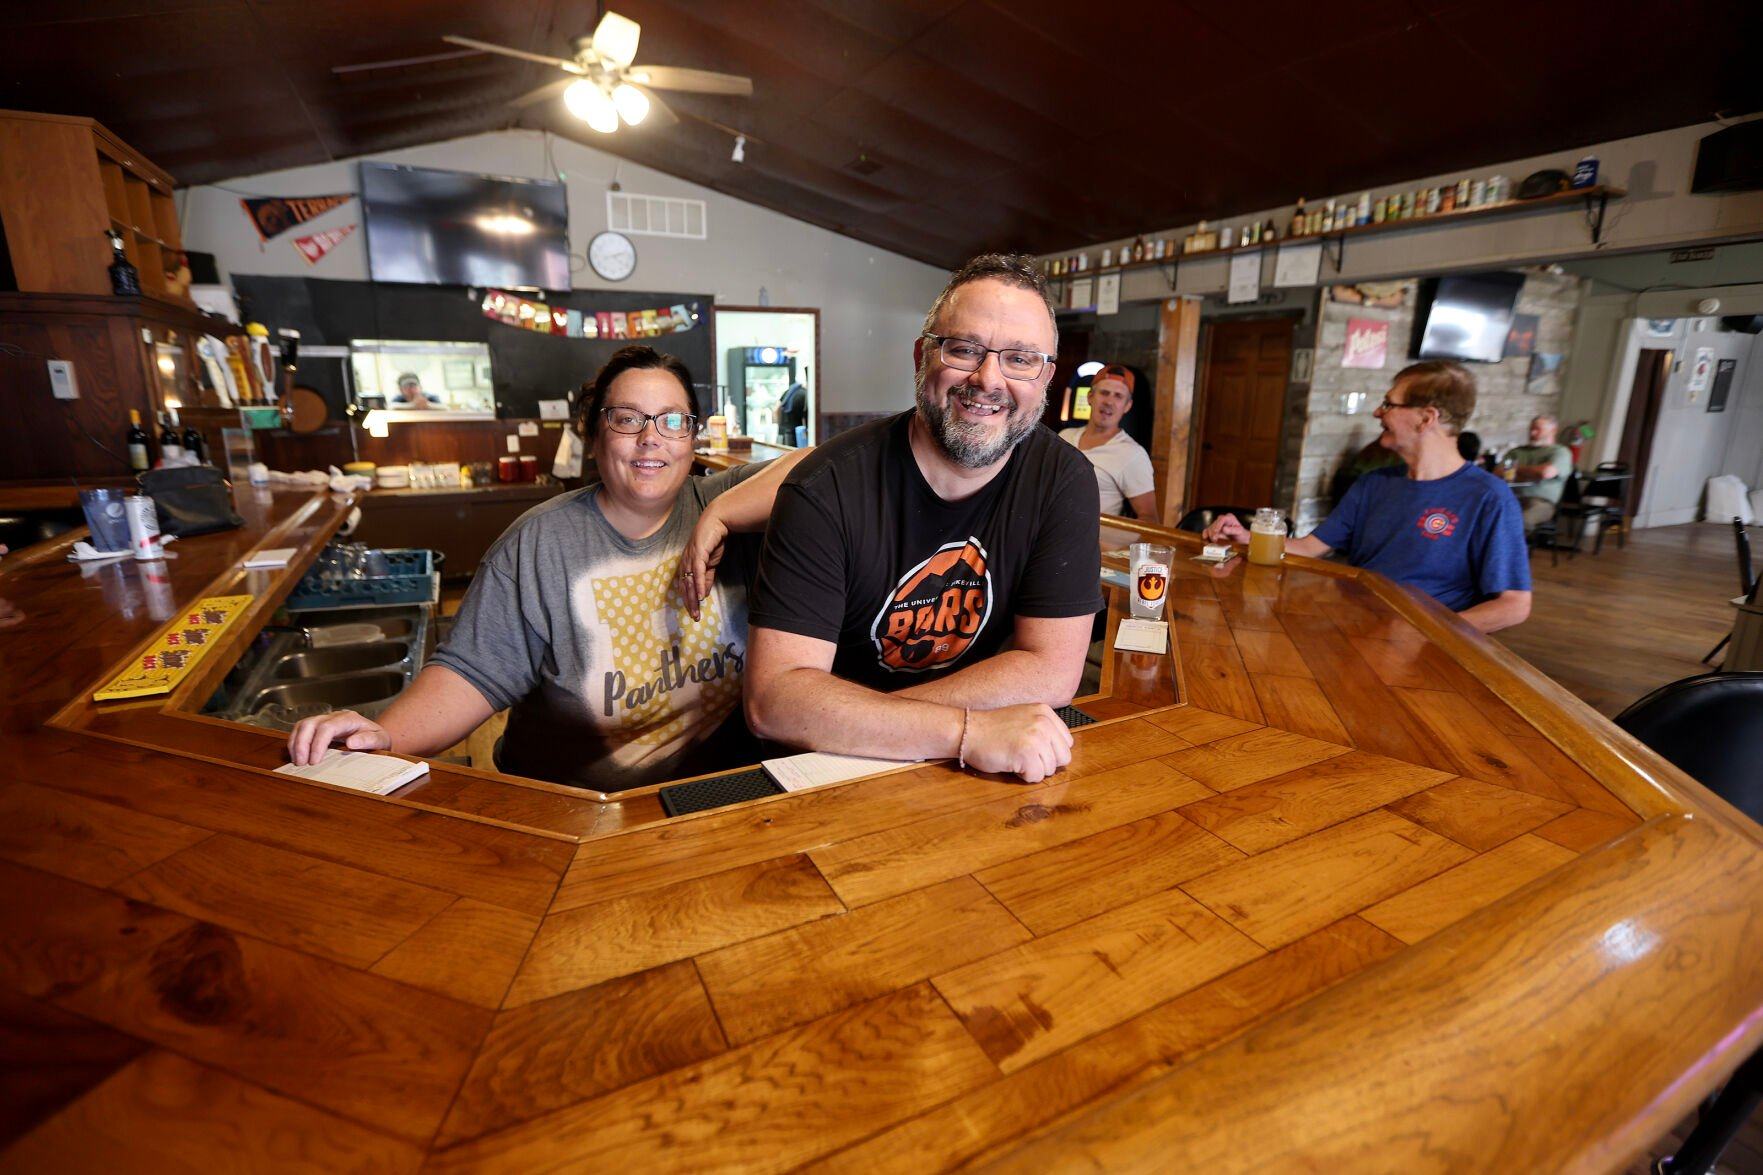 Becky Stapleton and her husband OJ are the new owners of Old Jug’s (OJ’s) Main Street Tap in Elizabeth, Ill.    PHOTO CREDIT: Dave Kettering